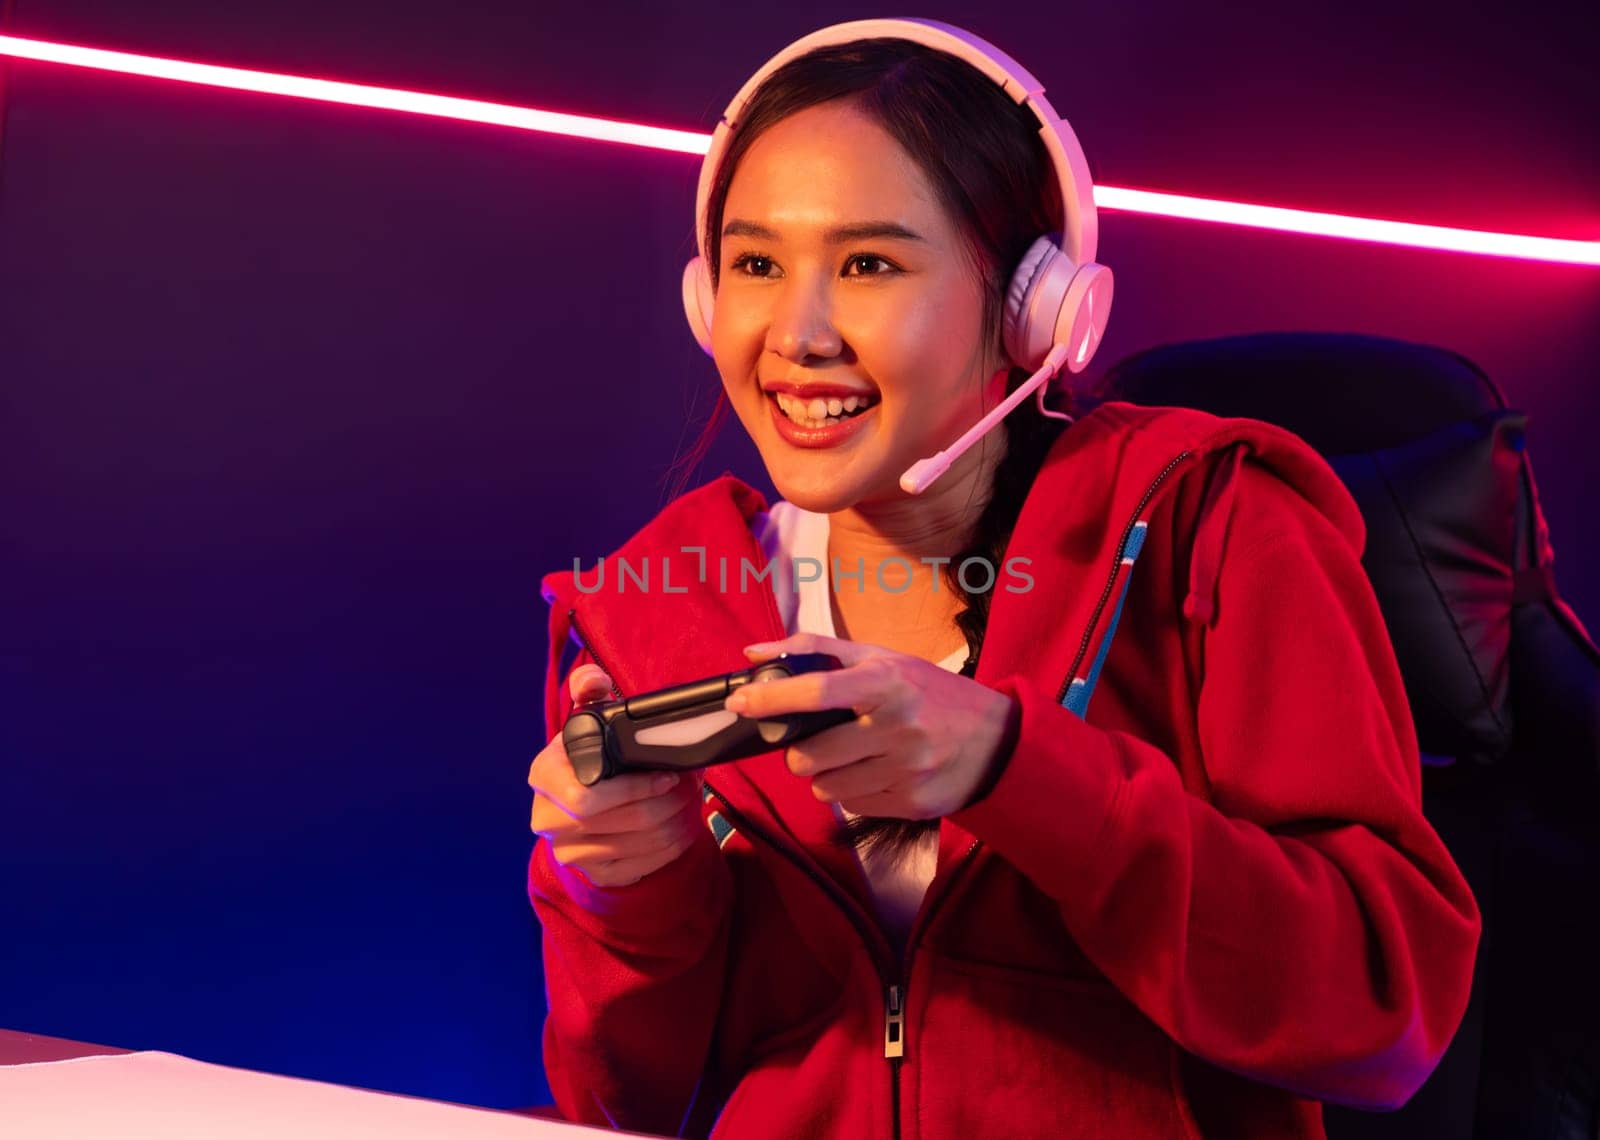 Host channel of smiling beautiful Asian girl streamer with joystick playing online game wearing headphones paste talking with viewers media online. Esport skilled team players in neon room. Stratagem.